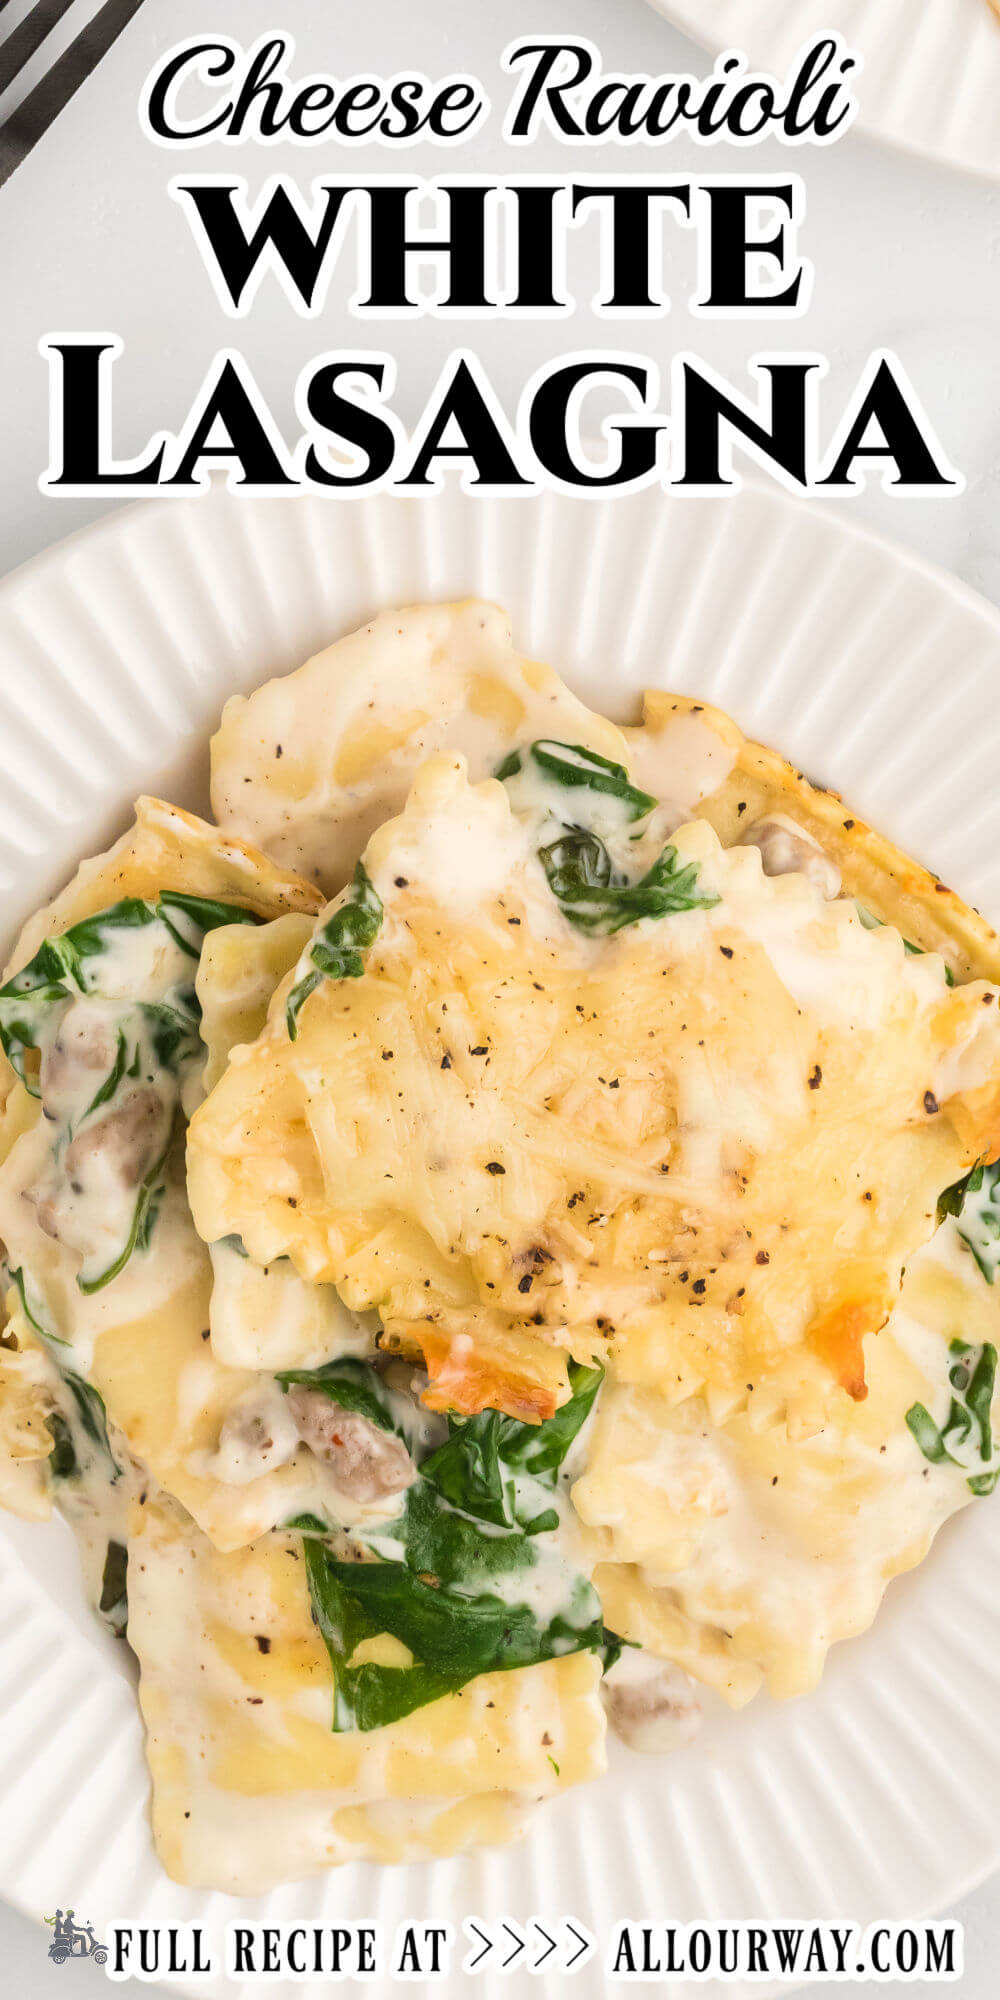 This White Lasagna recipe made with ravioli is creamy and flavorful and much easier than the classic dish. It still includes the yummy cheese, sausage, spinach, and a savory taste. If you're craving lasagna but don't have the time, give this creamy ravioli baked pasta recipe a try.